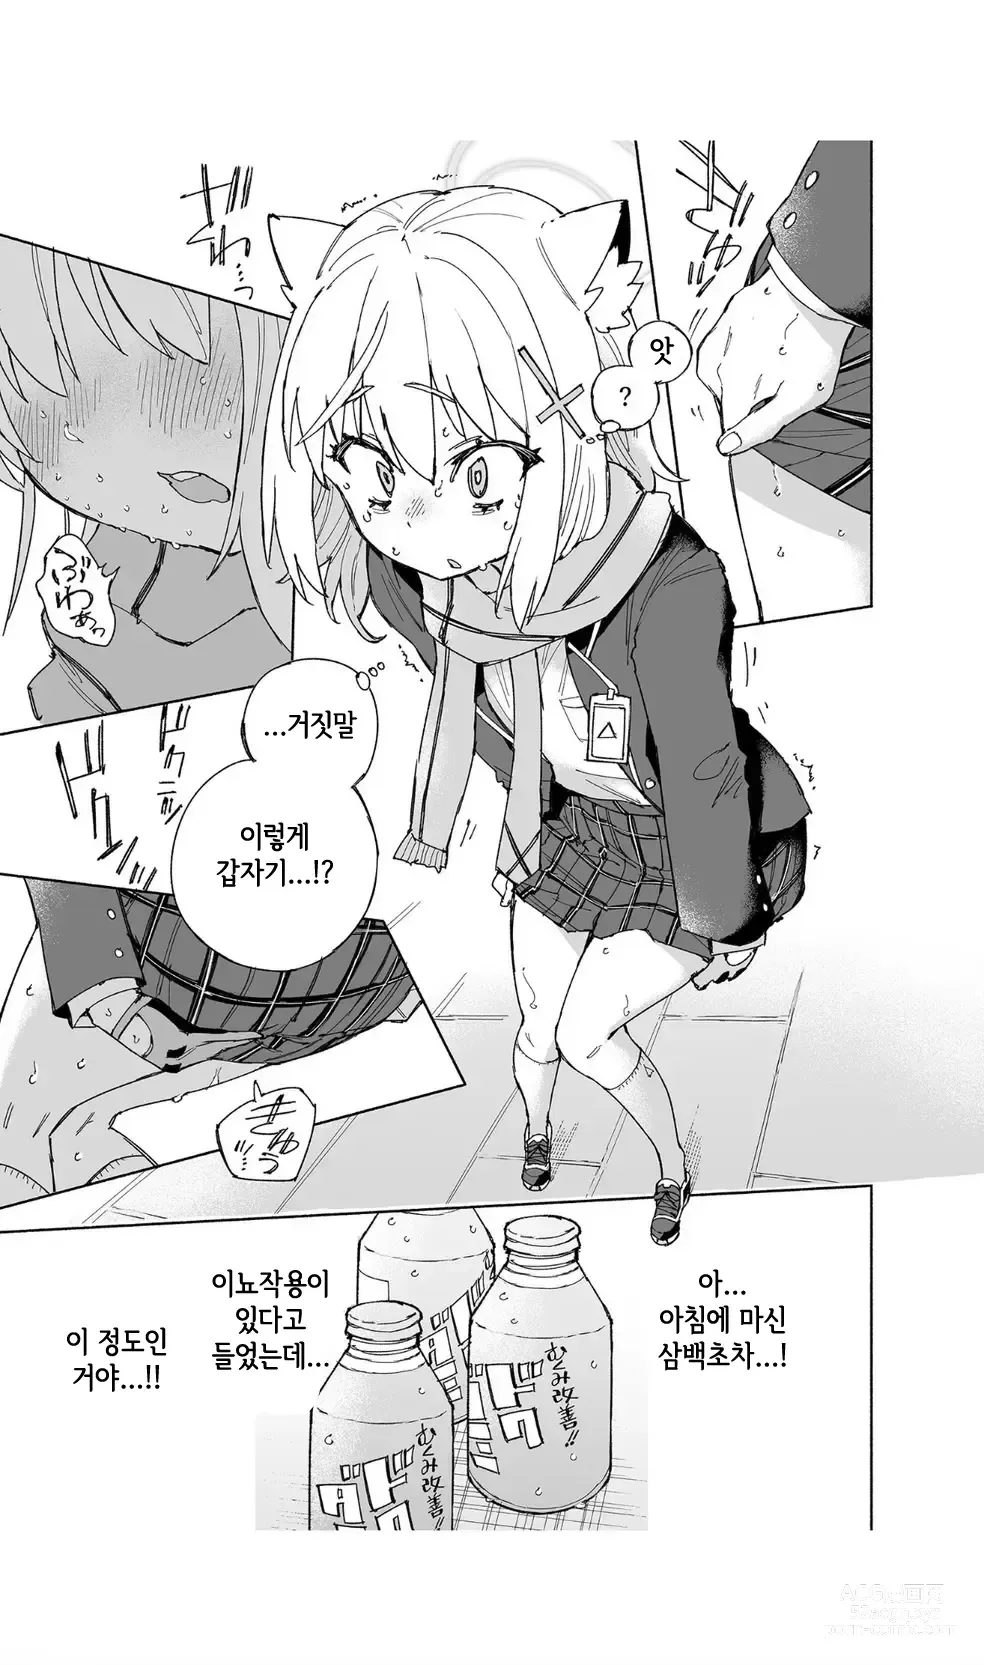 Page 10 of doujinshi 늑대의 물